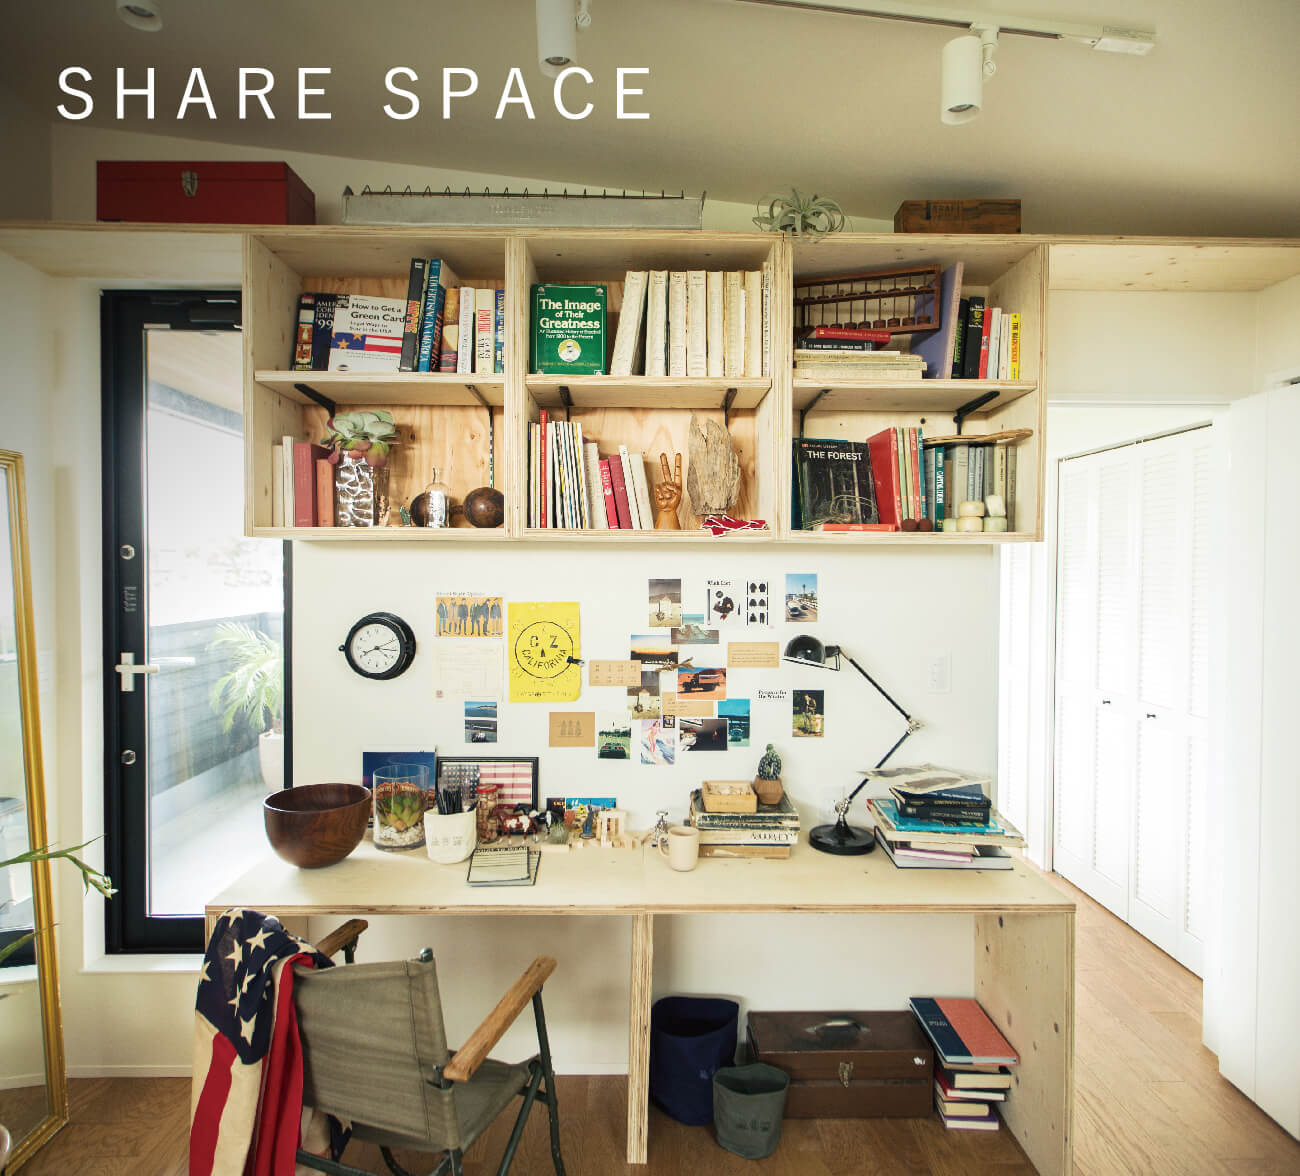 SHARE SPACE